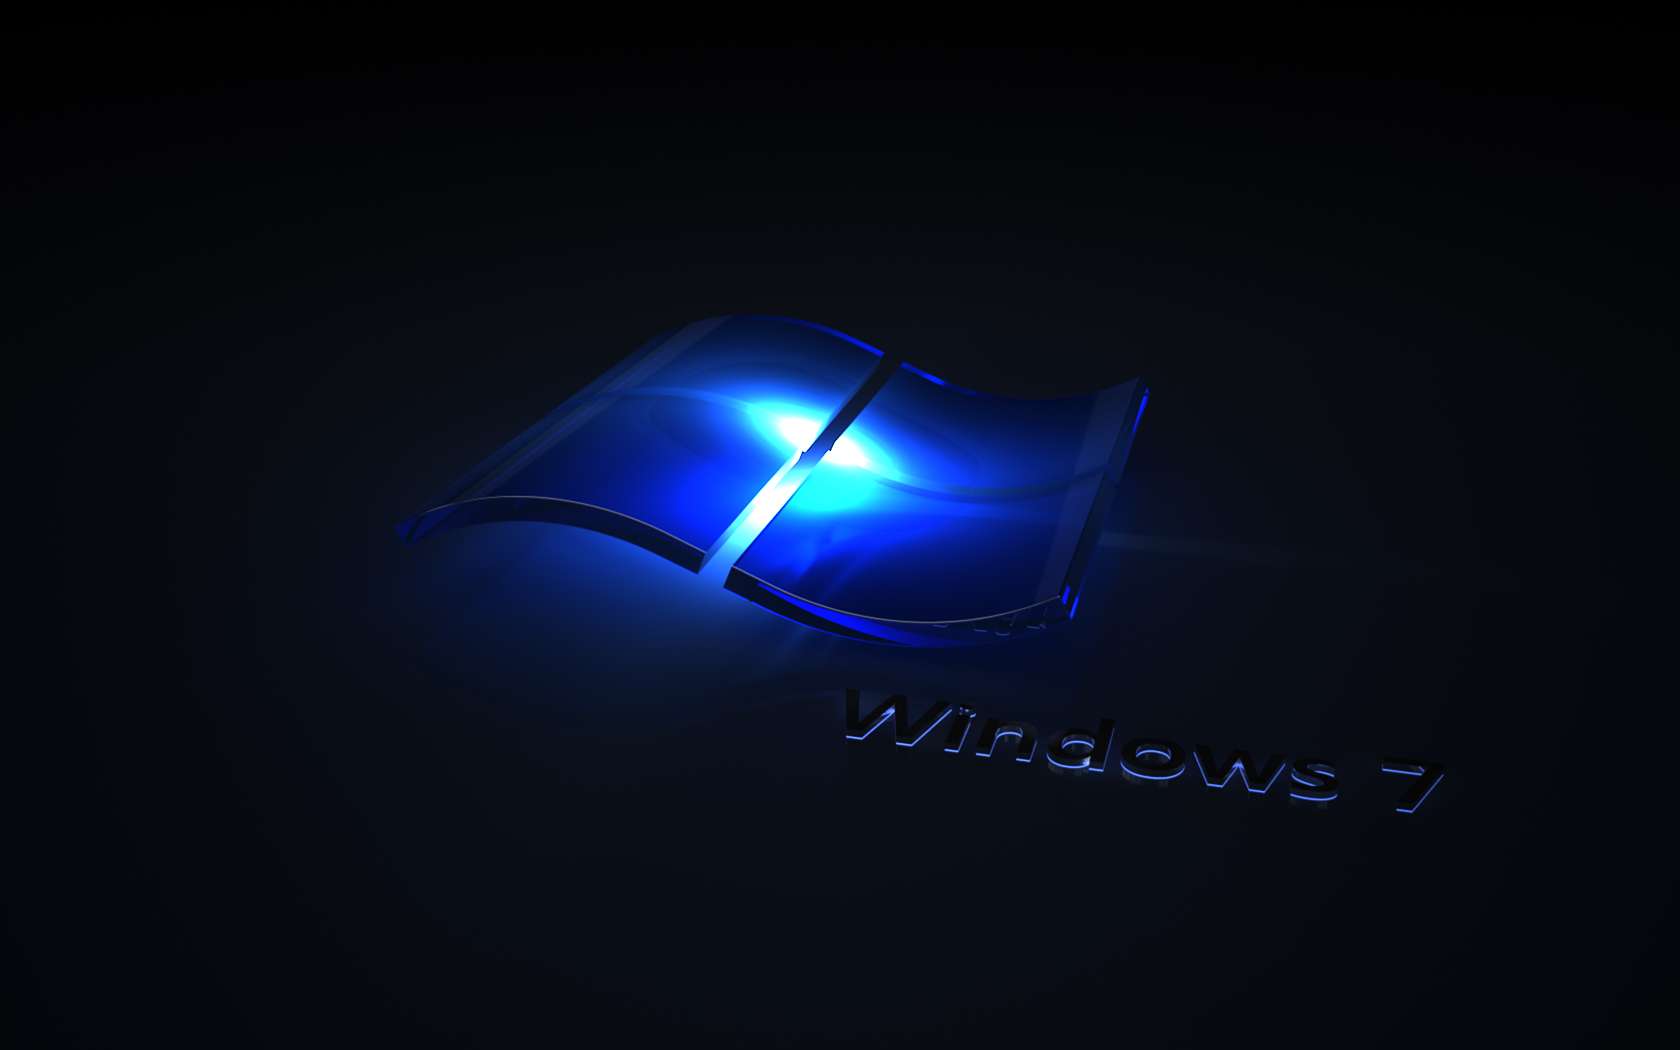 Awesome Windows 7 Backgrounds submited images